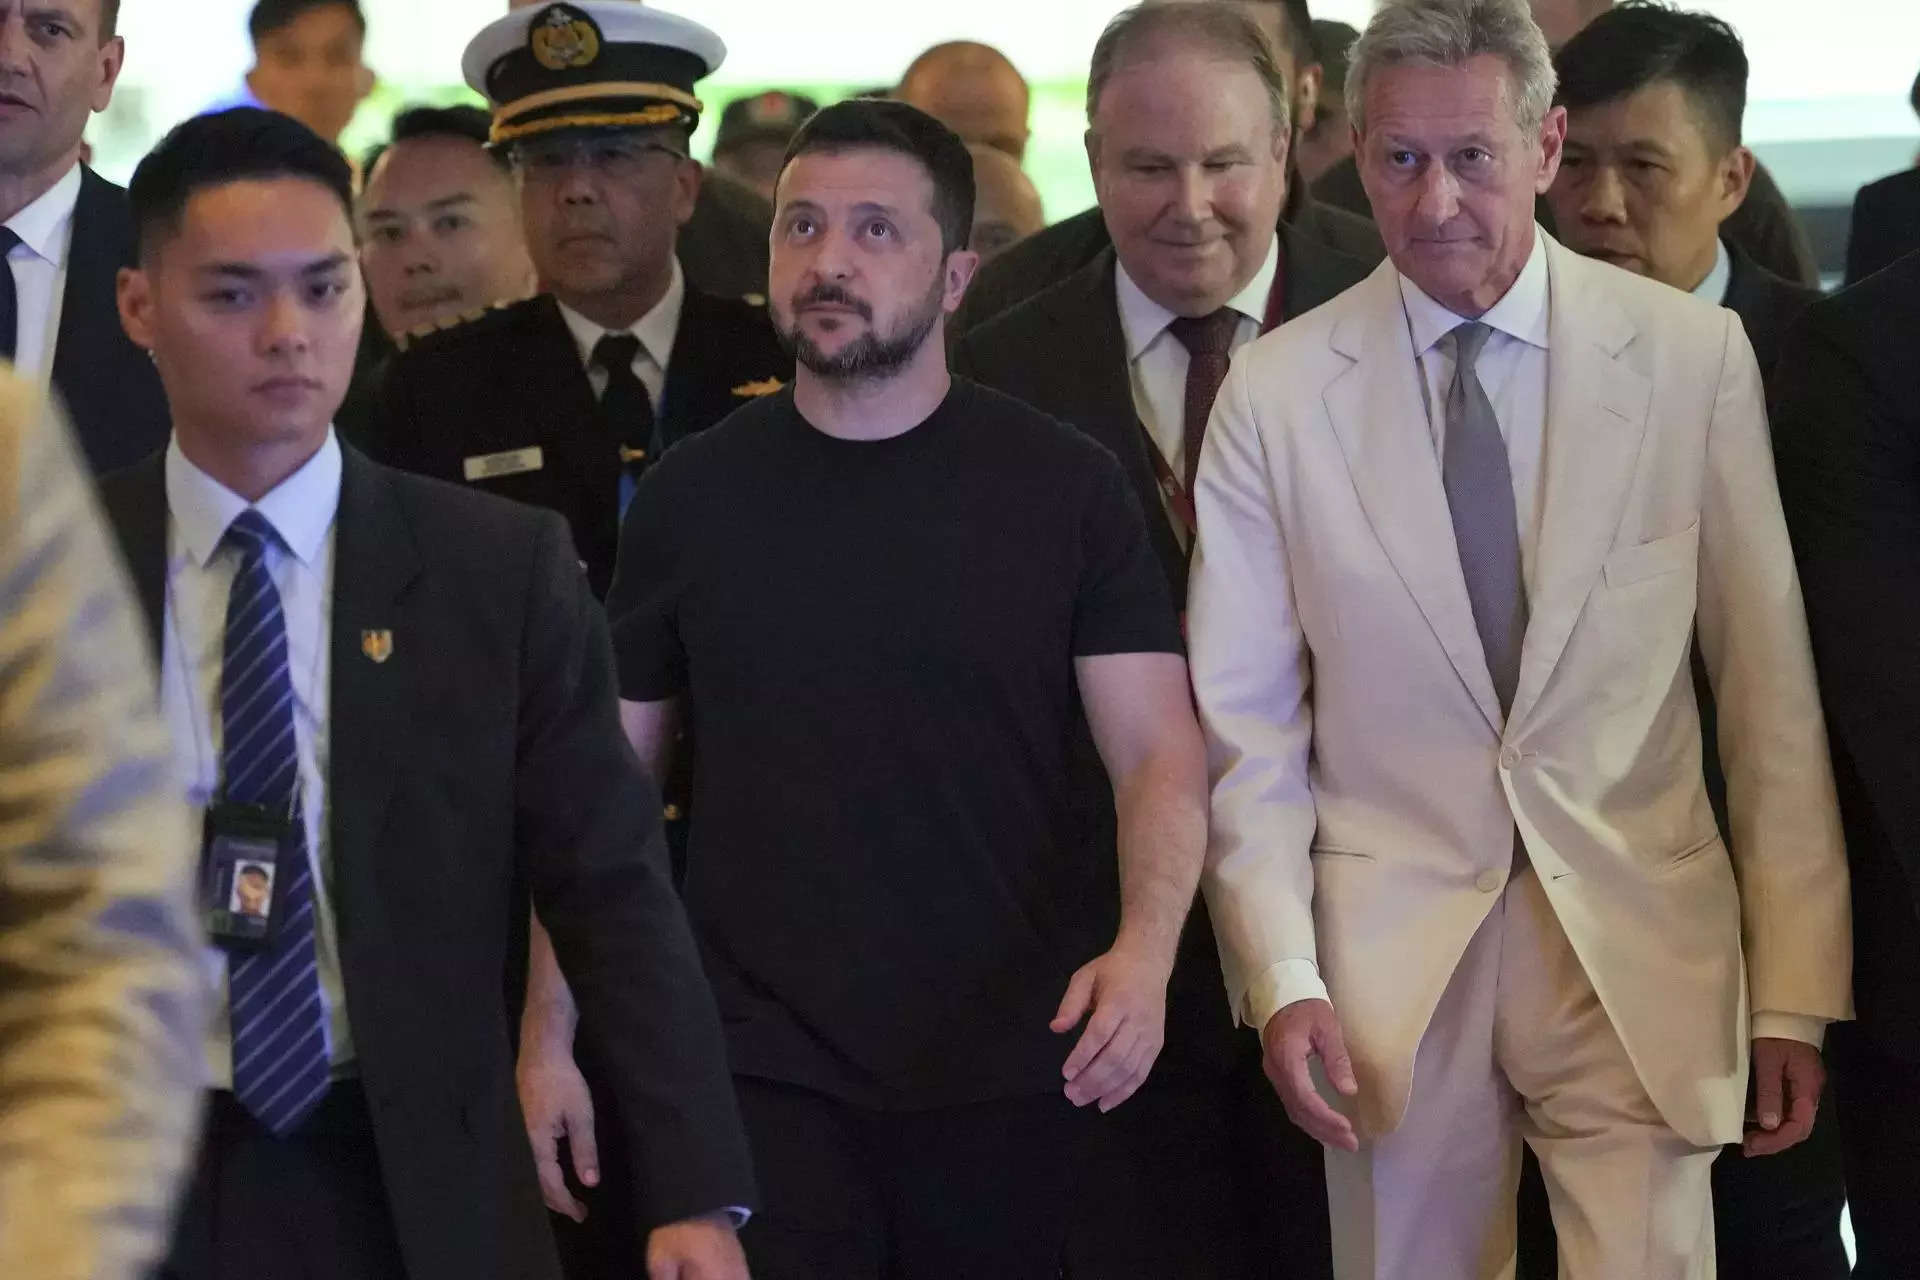 Zelenskyy meets heads of state in Singapore, seeks support for security summit